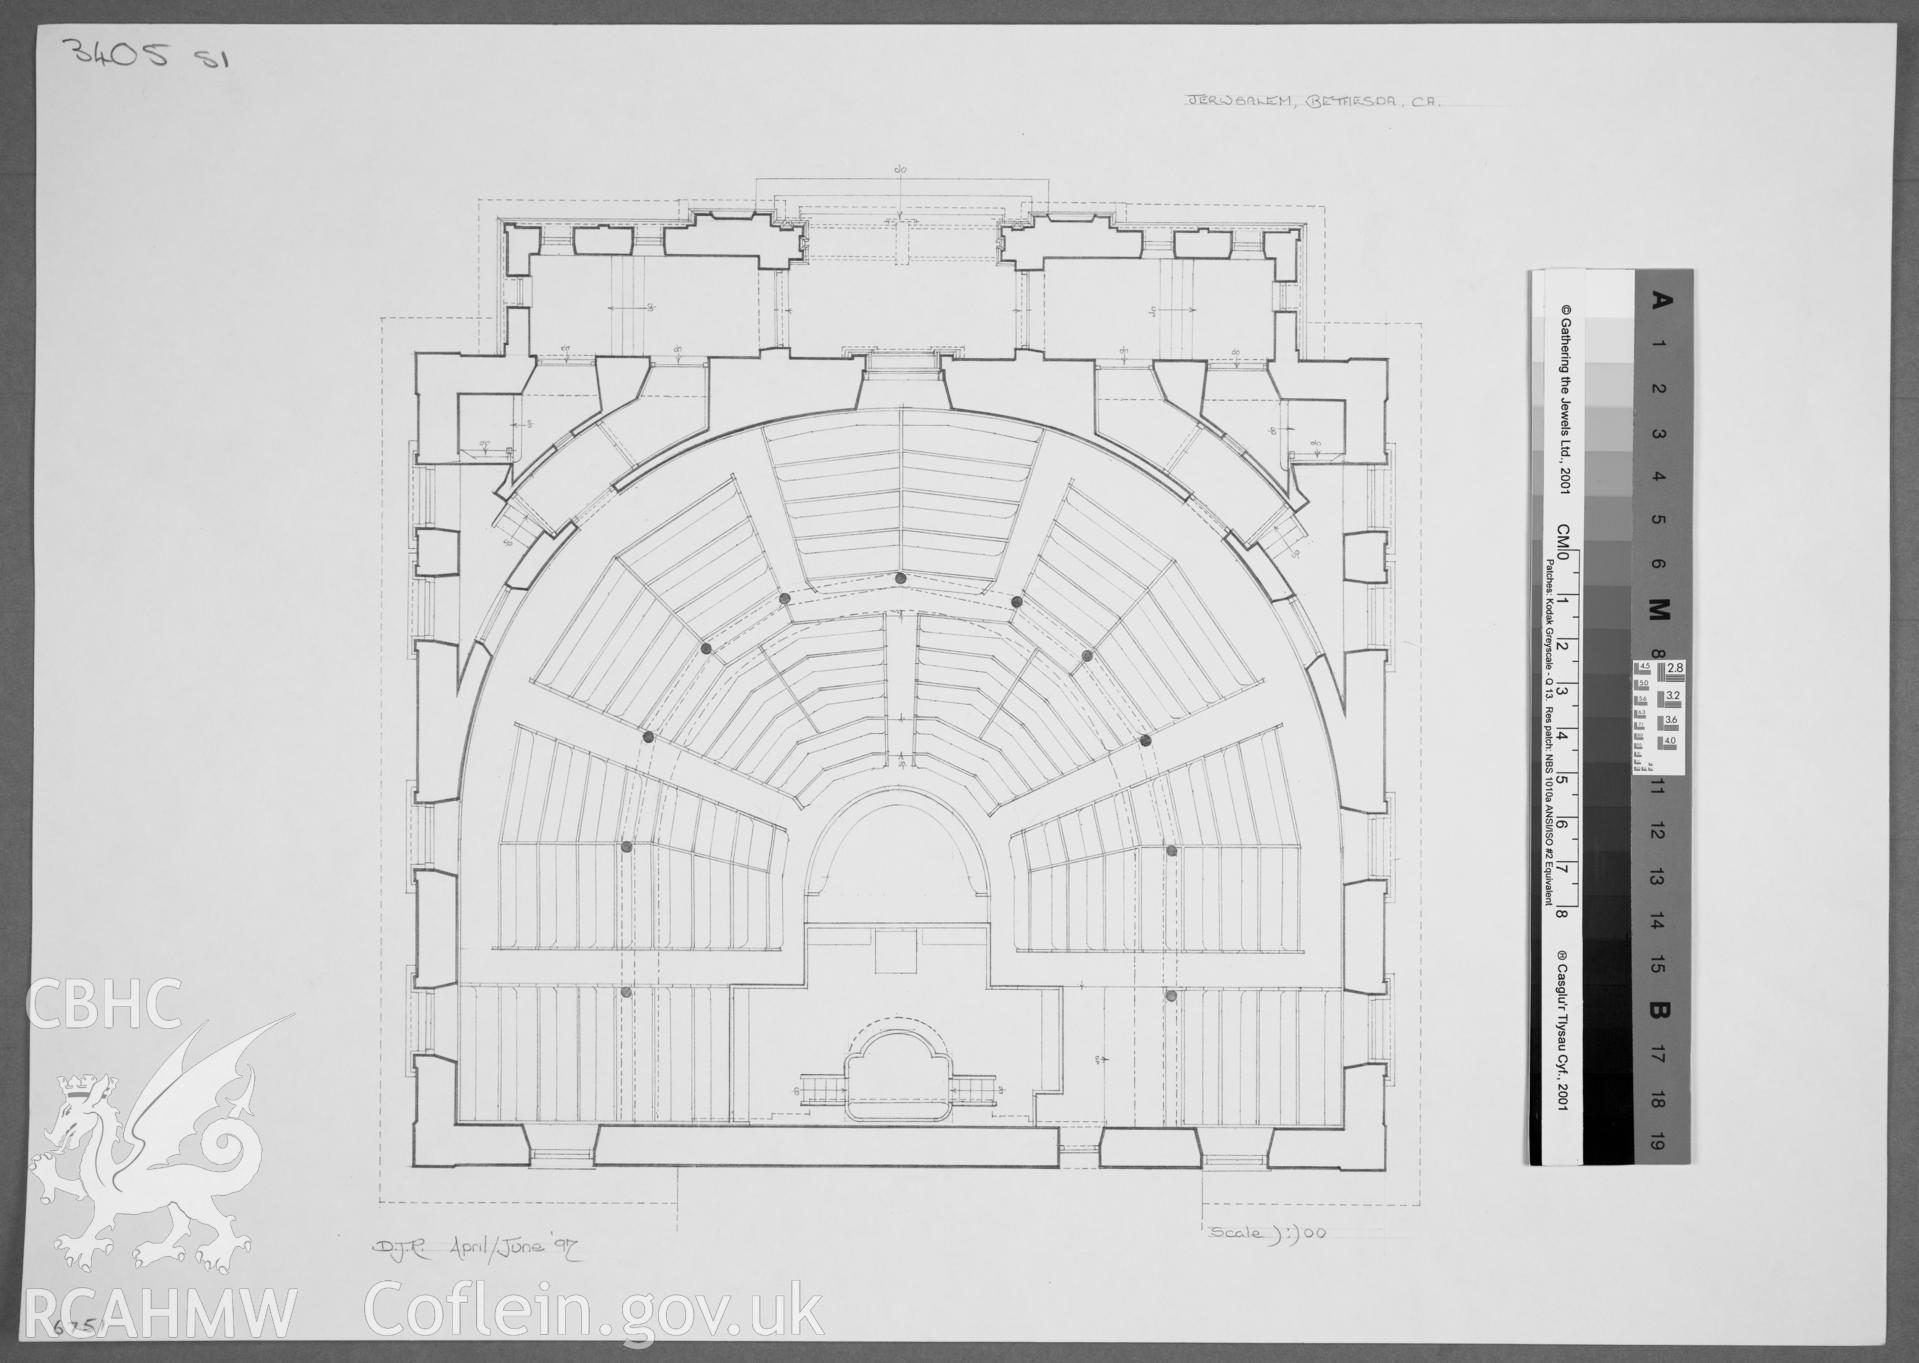 Jerusalem Chapel, Bethesda; Measured drawing showing plan of chapel, surveyed and drawn by Dylan Roberts, April 1997.